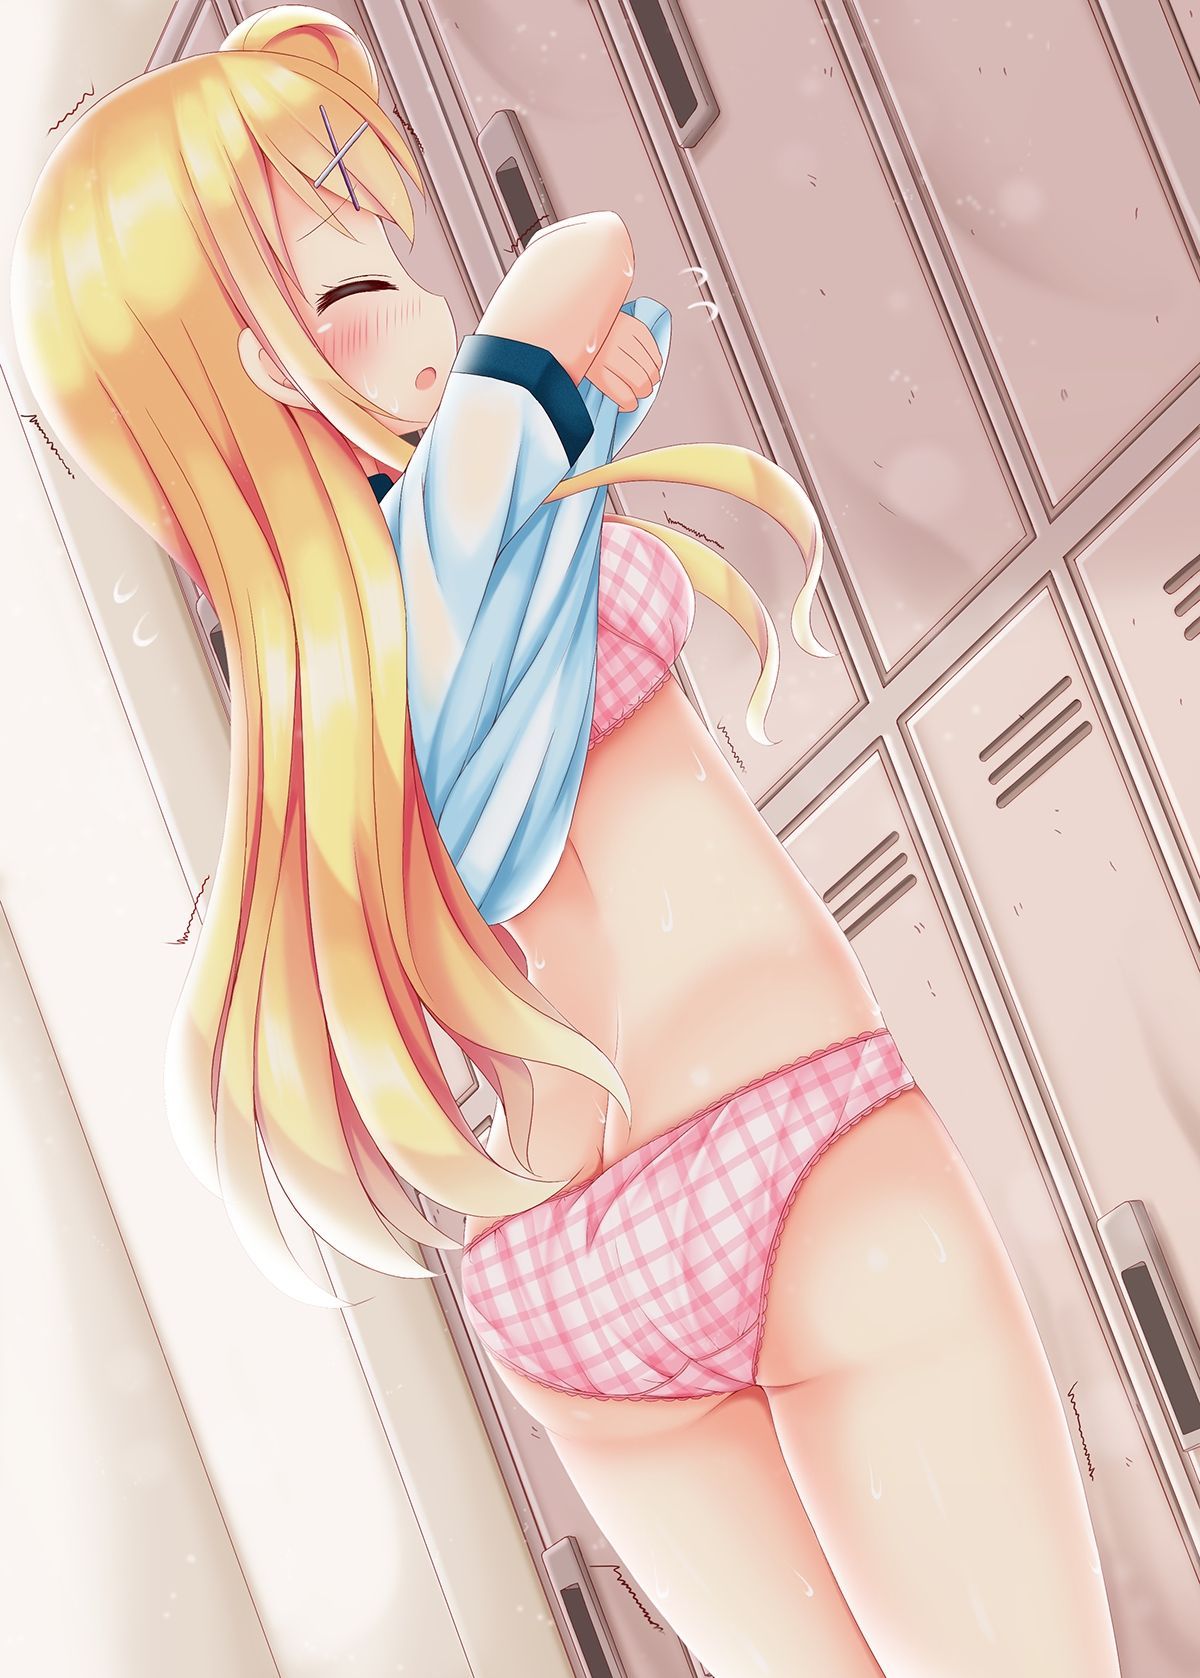 Erotic anime summary Paradise erotic image of beautiful girls changing clothes in the changing room [secondary erotic] 26